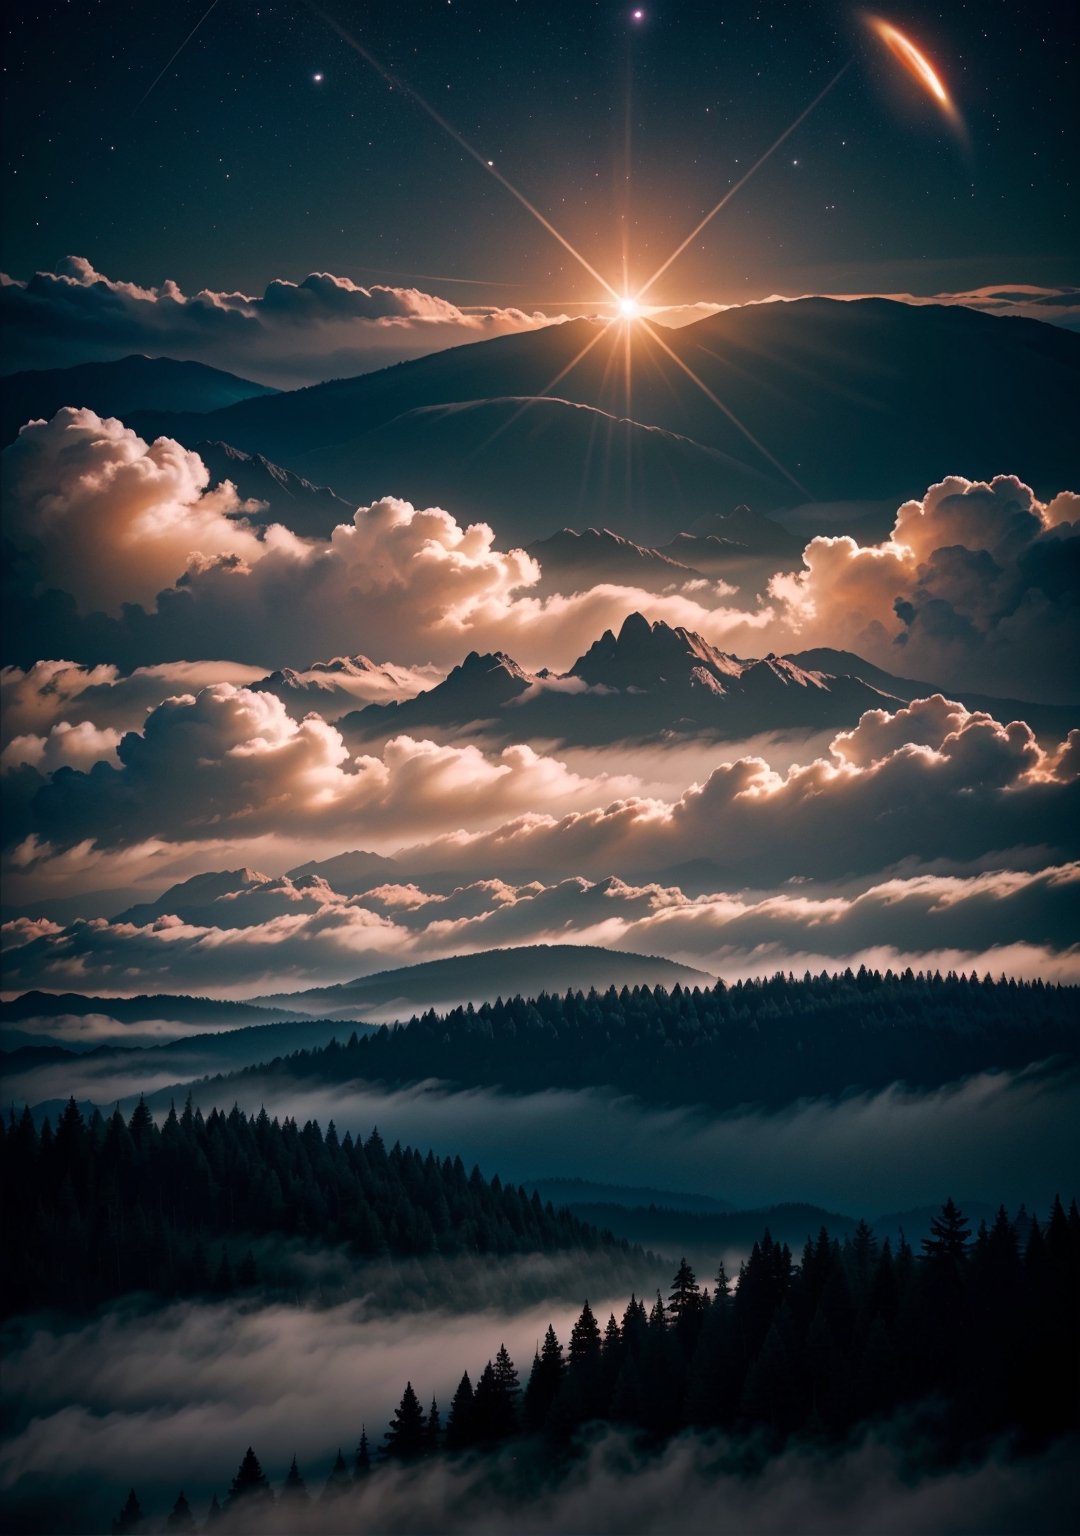 Generate an image of a surreal crystalline forest during the golden hour. The forest floor is covered in mist,revealing rocky terrain beneath. Distant mountains fade into the background through atmospheric perspective. Altostratus clouds drift above,and planets adorn the horizon. This cinematic scene,captured with a 35mm lens and anamorphic lens flare,combines low details and surrealism,reminiscent of Ansel Adams' style.